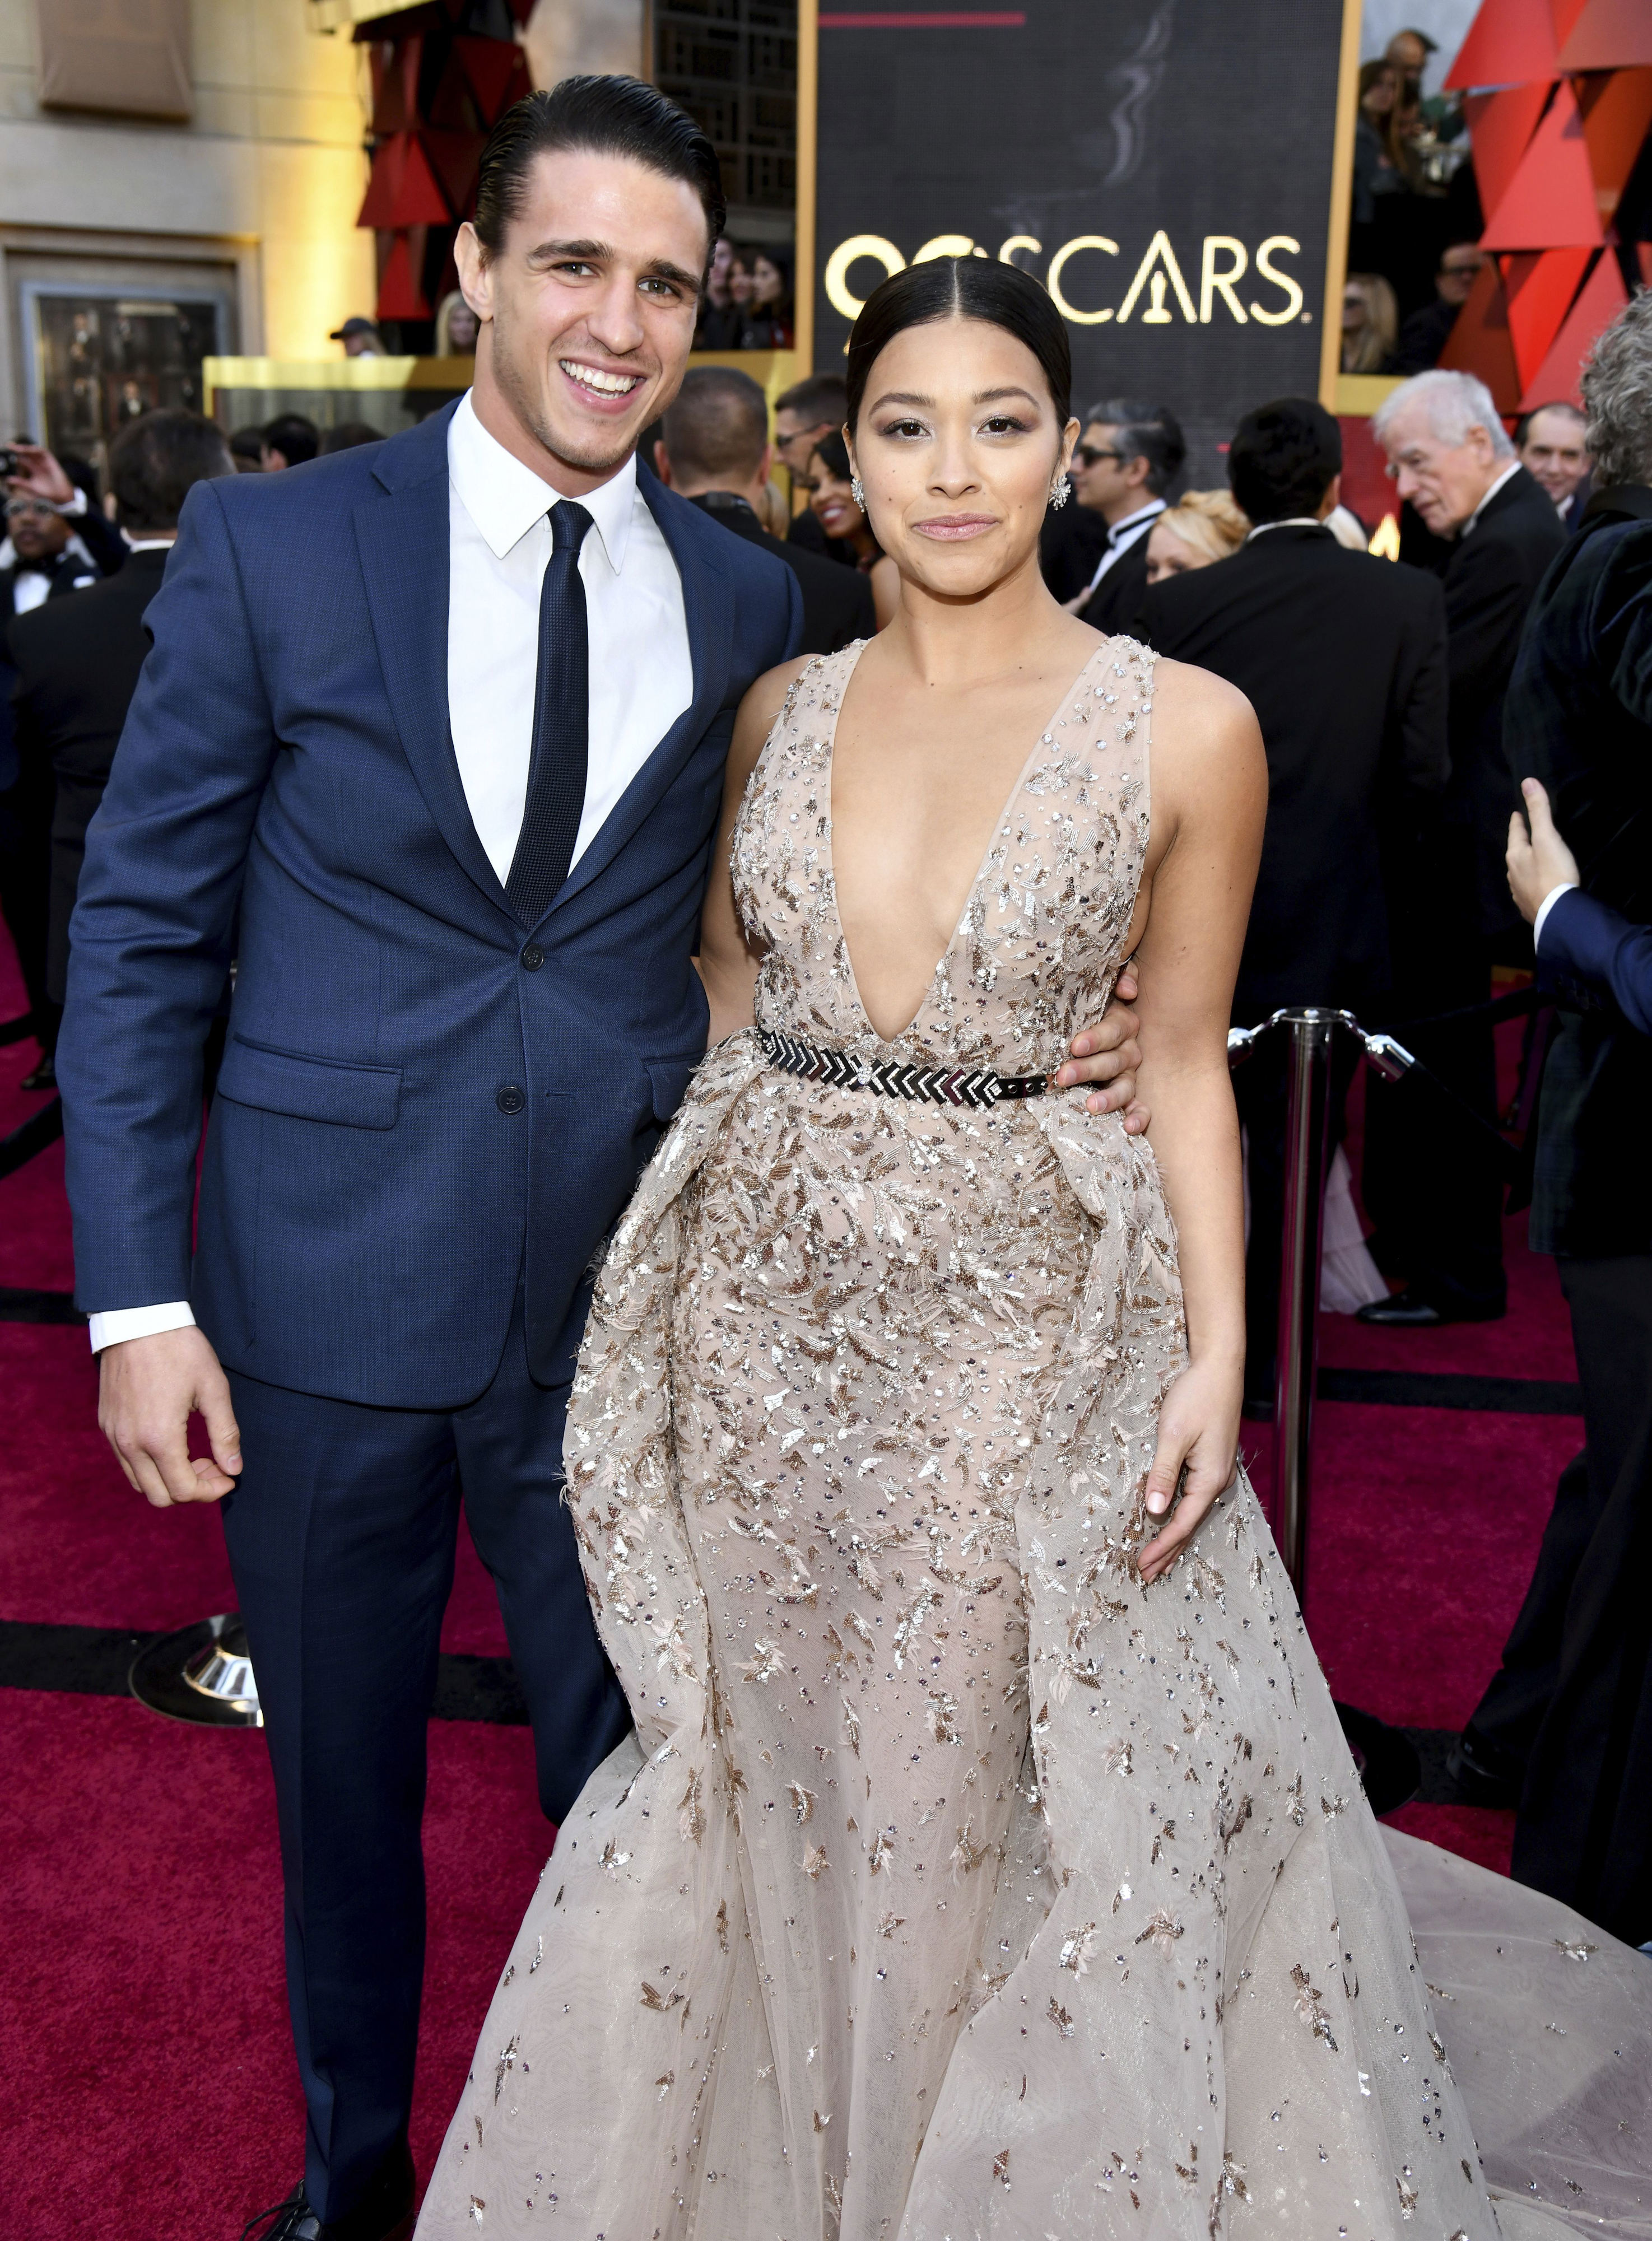 <p>"Jane the Virgin" star Gina Rodriguez met her husband, actor and Muay Thai fighter Joe LoCicero, at work in 2016. "I met [him] on the set of 'Jane.' So 'Jane' gave me a lot of things -- not only an amazing life and a dream come true, but they gave me my love, the love of my life," she said on "The Tonight Show Starring Jimmy Fallon" in January 2019. "So he came onto 'Jane.' He was playing Don Quixote, the stripper. … He came on as a stripper that my mother hired for my bachelorette party and Jane is, like, super-against it and super-terrified and just, like, doesn't know what to do with all that. But Gina does! I was like, 'Hey, hold on one second there.' But actually it was a little different. I met him like six months later in the boxing gym after we shot together, and it was the boxing gym that brought it together."</p>